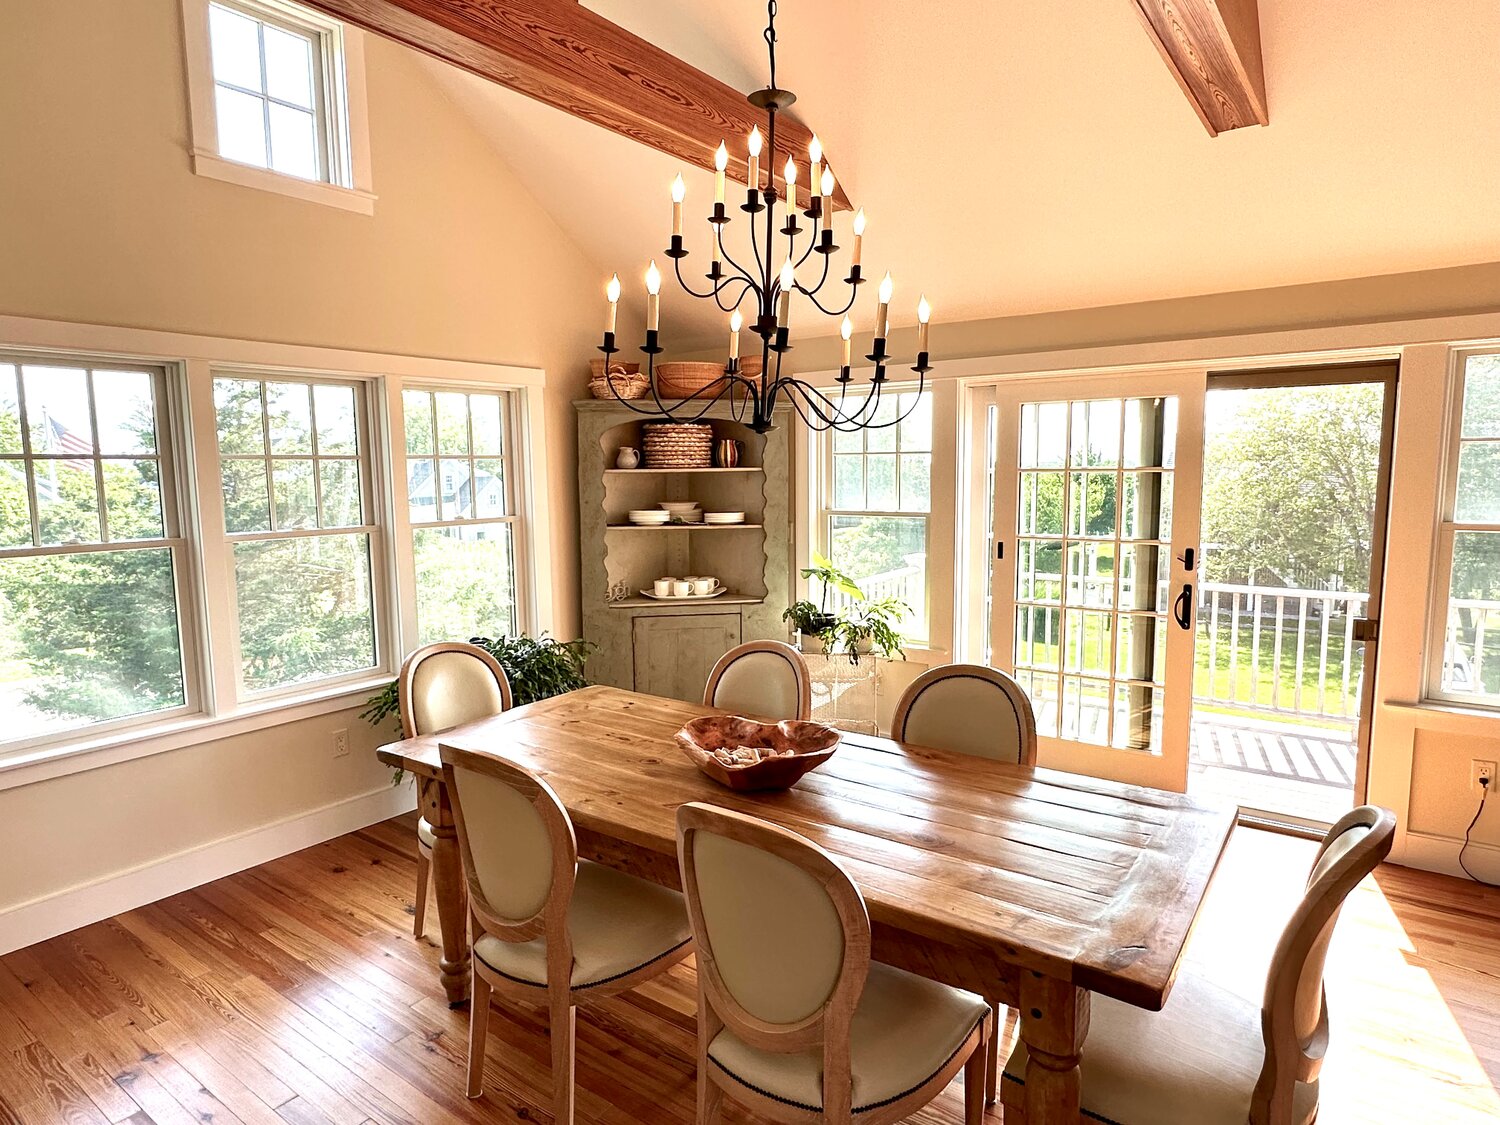 The dining room is filled with natural light.